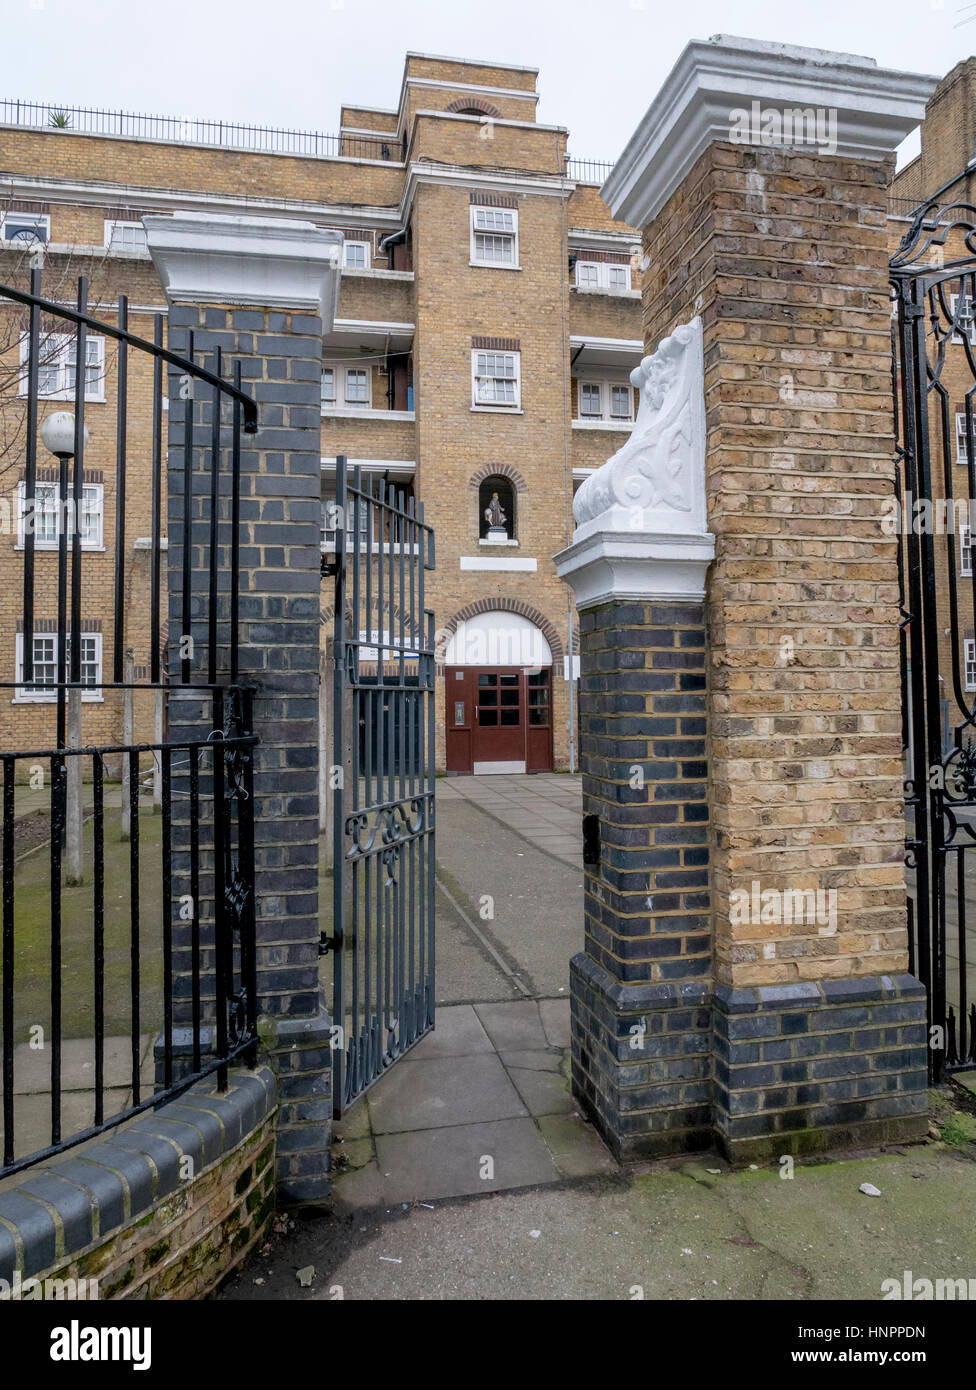 Entrance to housing estate in Somer's Town in Camden near King's Cross. Stock Photo